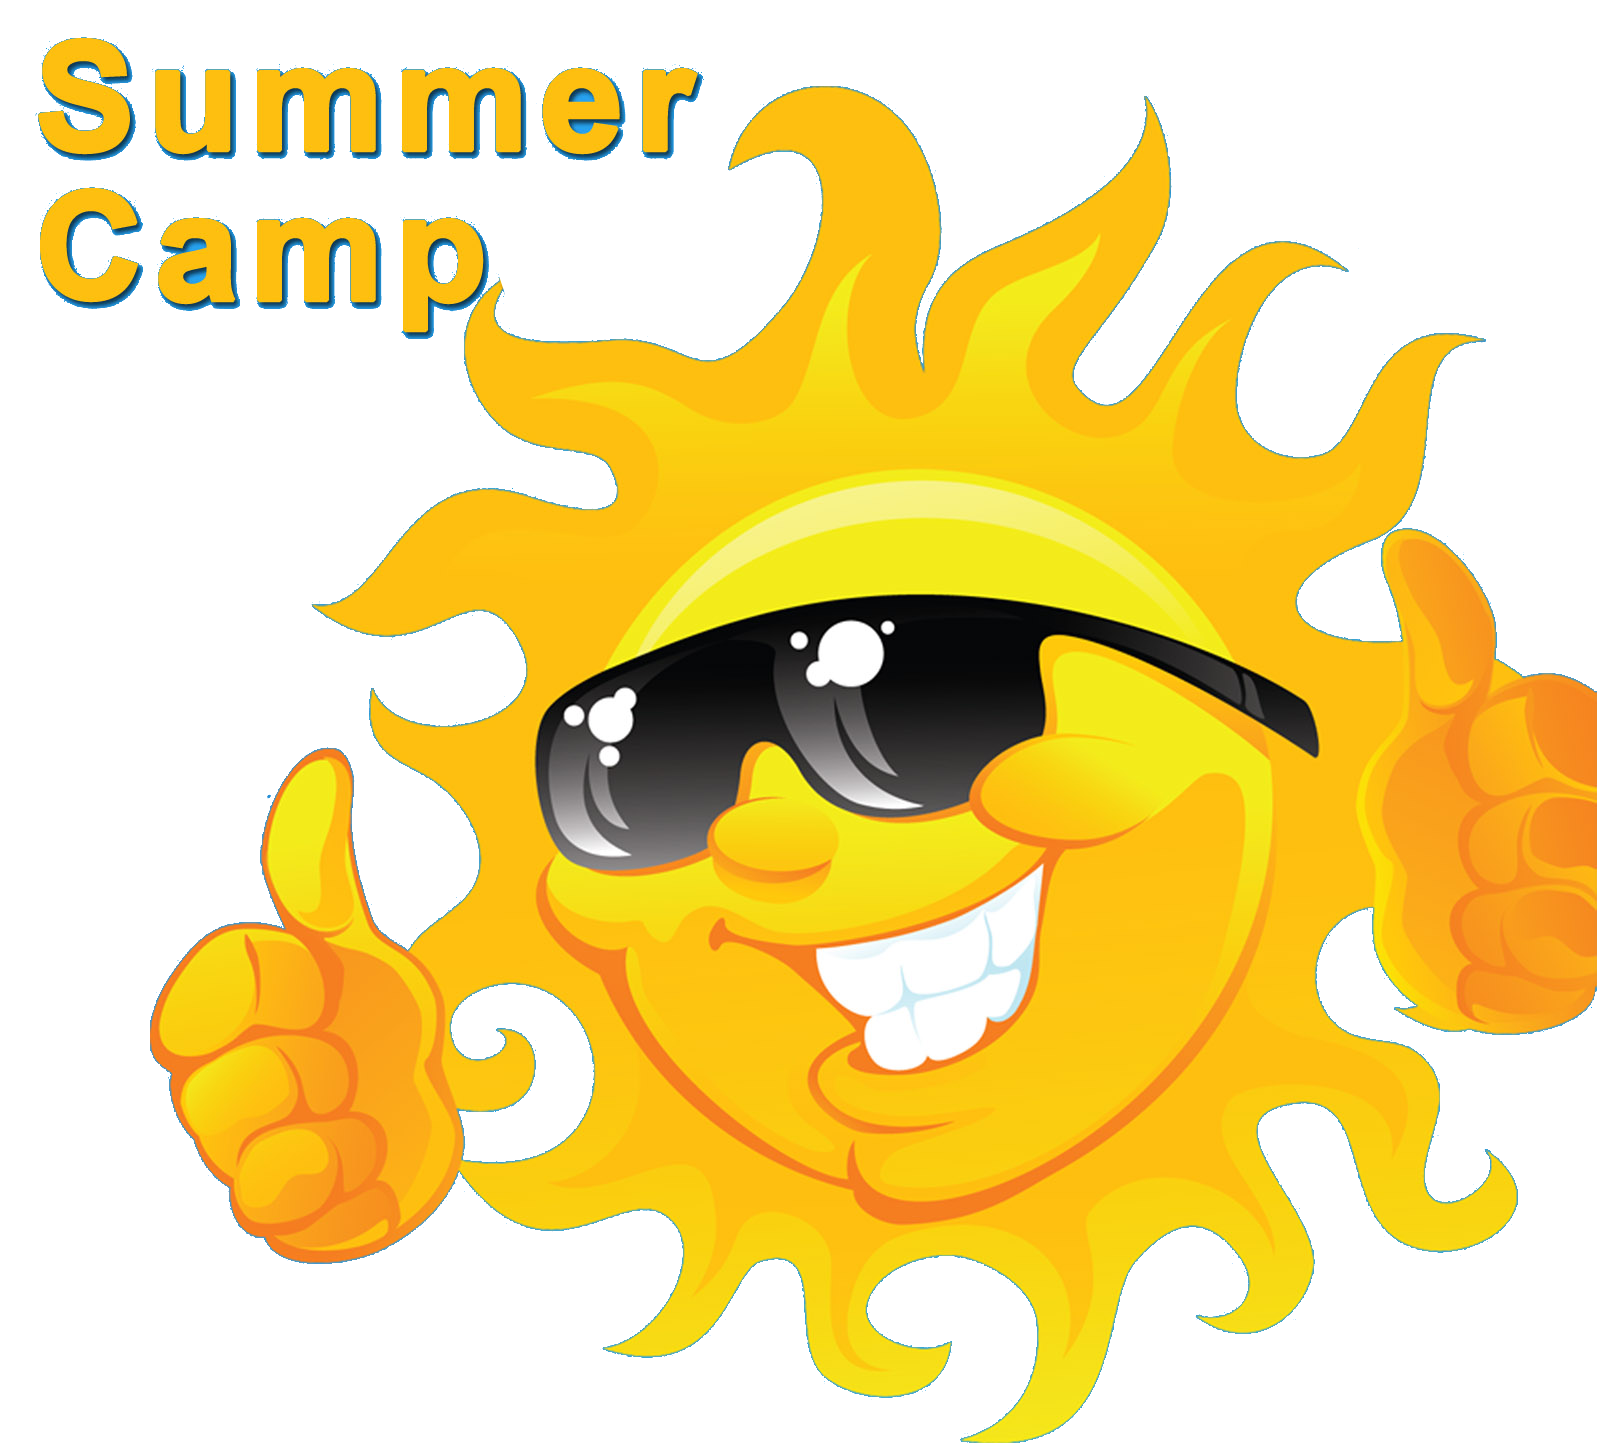 Summer camp opportunities for. Fitness clipart youth fitness